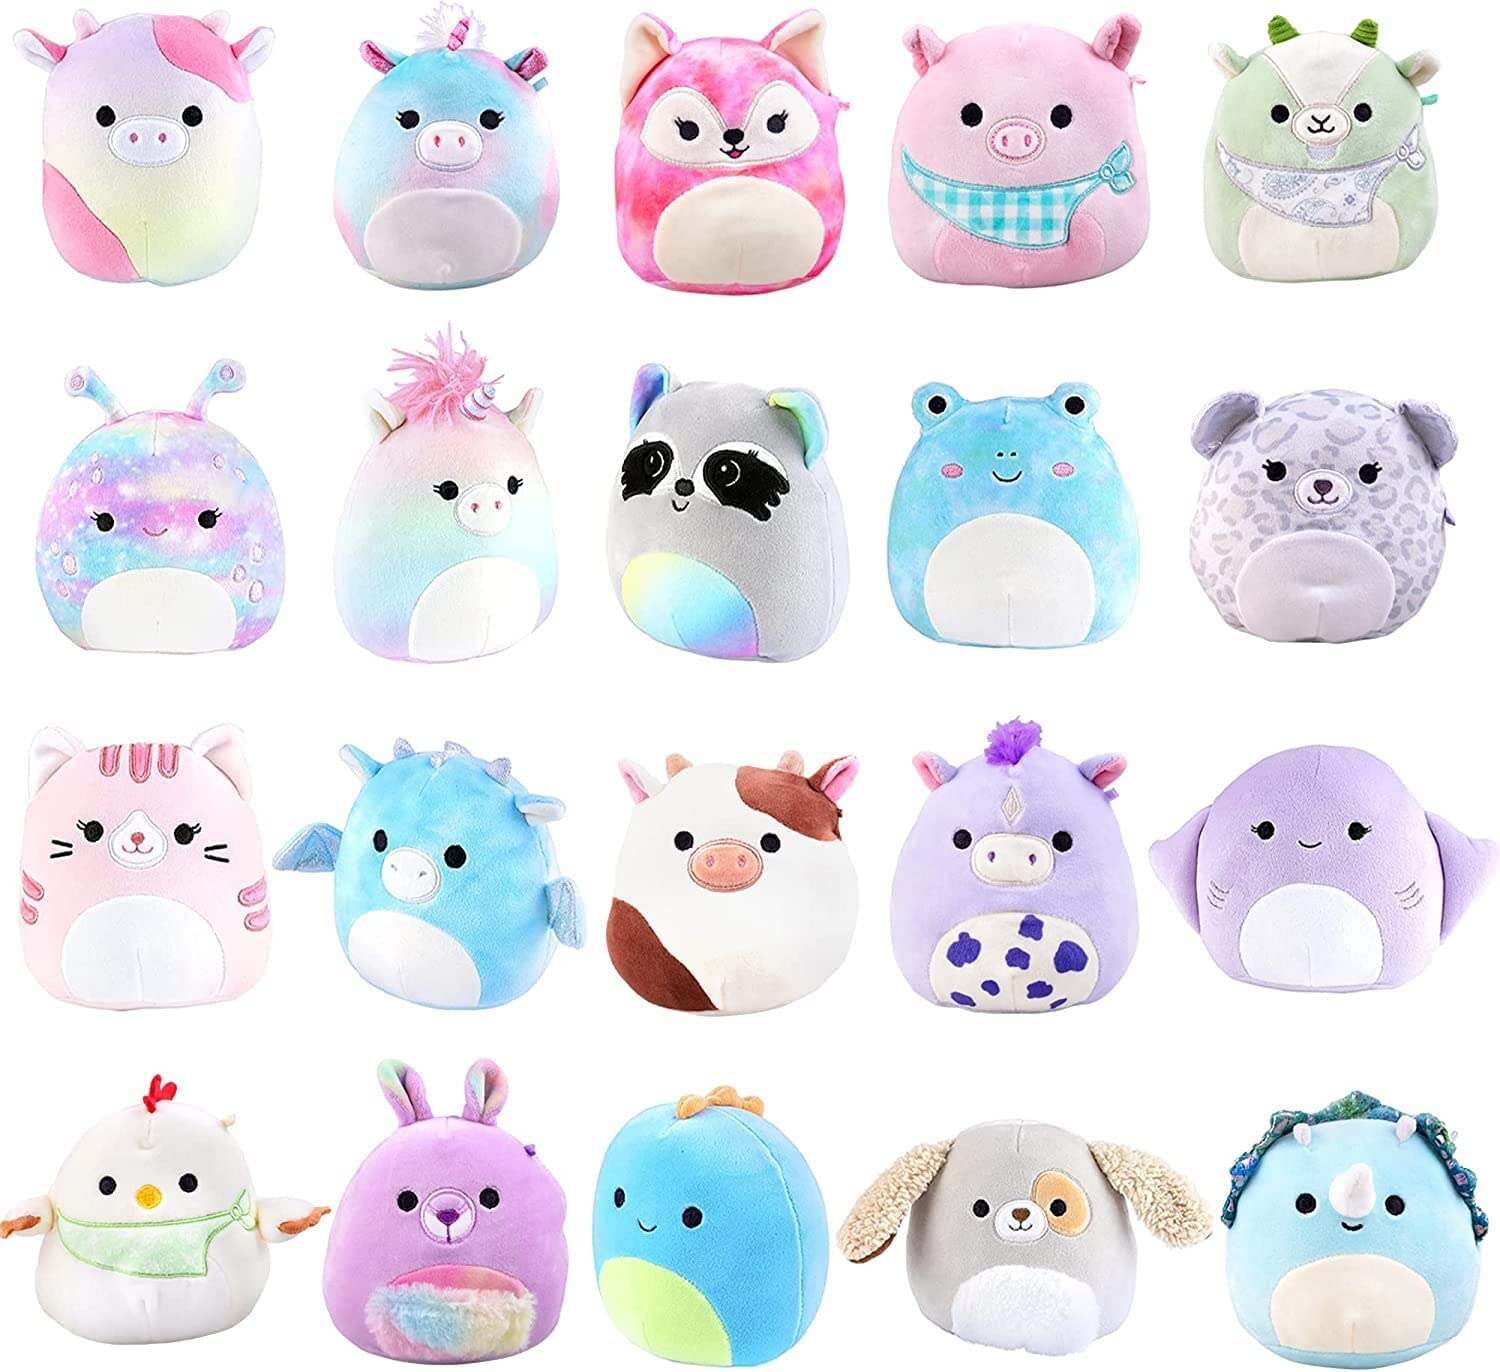 Squishmallow 5" Plush Mystery Box, 5-Pack - Assorted Set of Various Styles - Official Kellytoy - Cute and Soft Squishy Stuffed Animal Toy - image 5 of 5